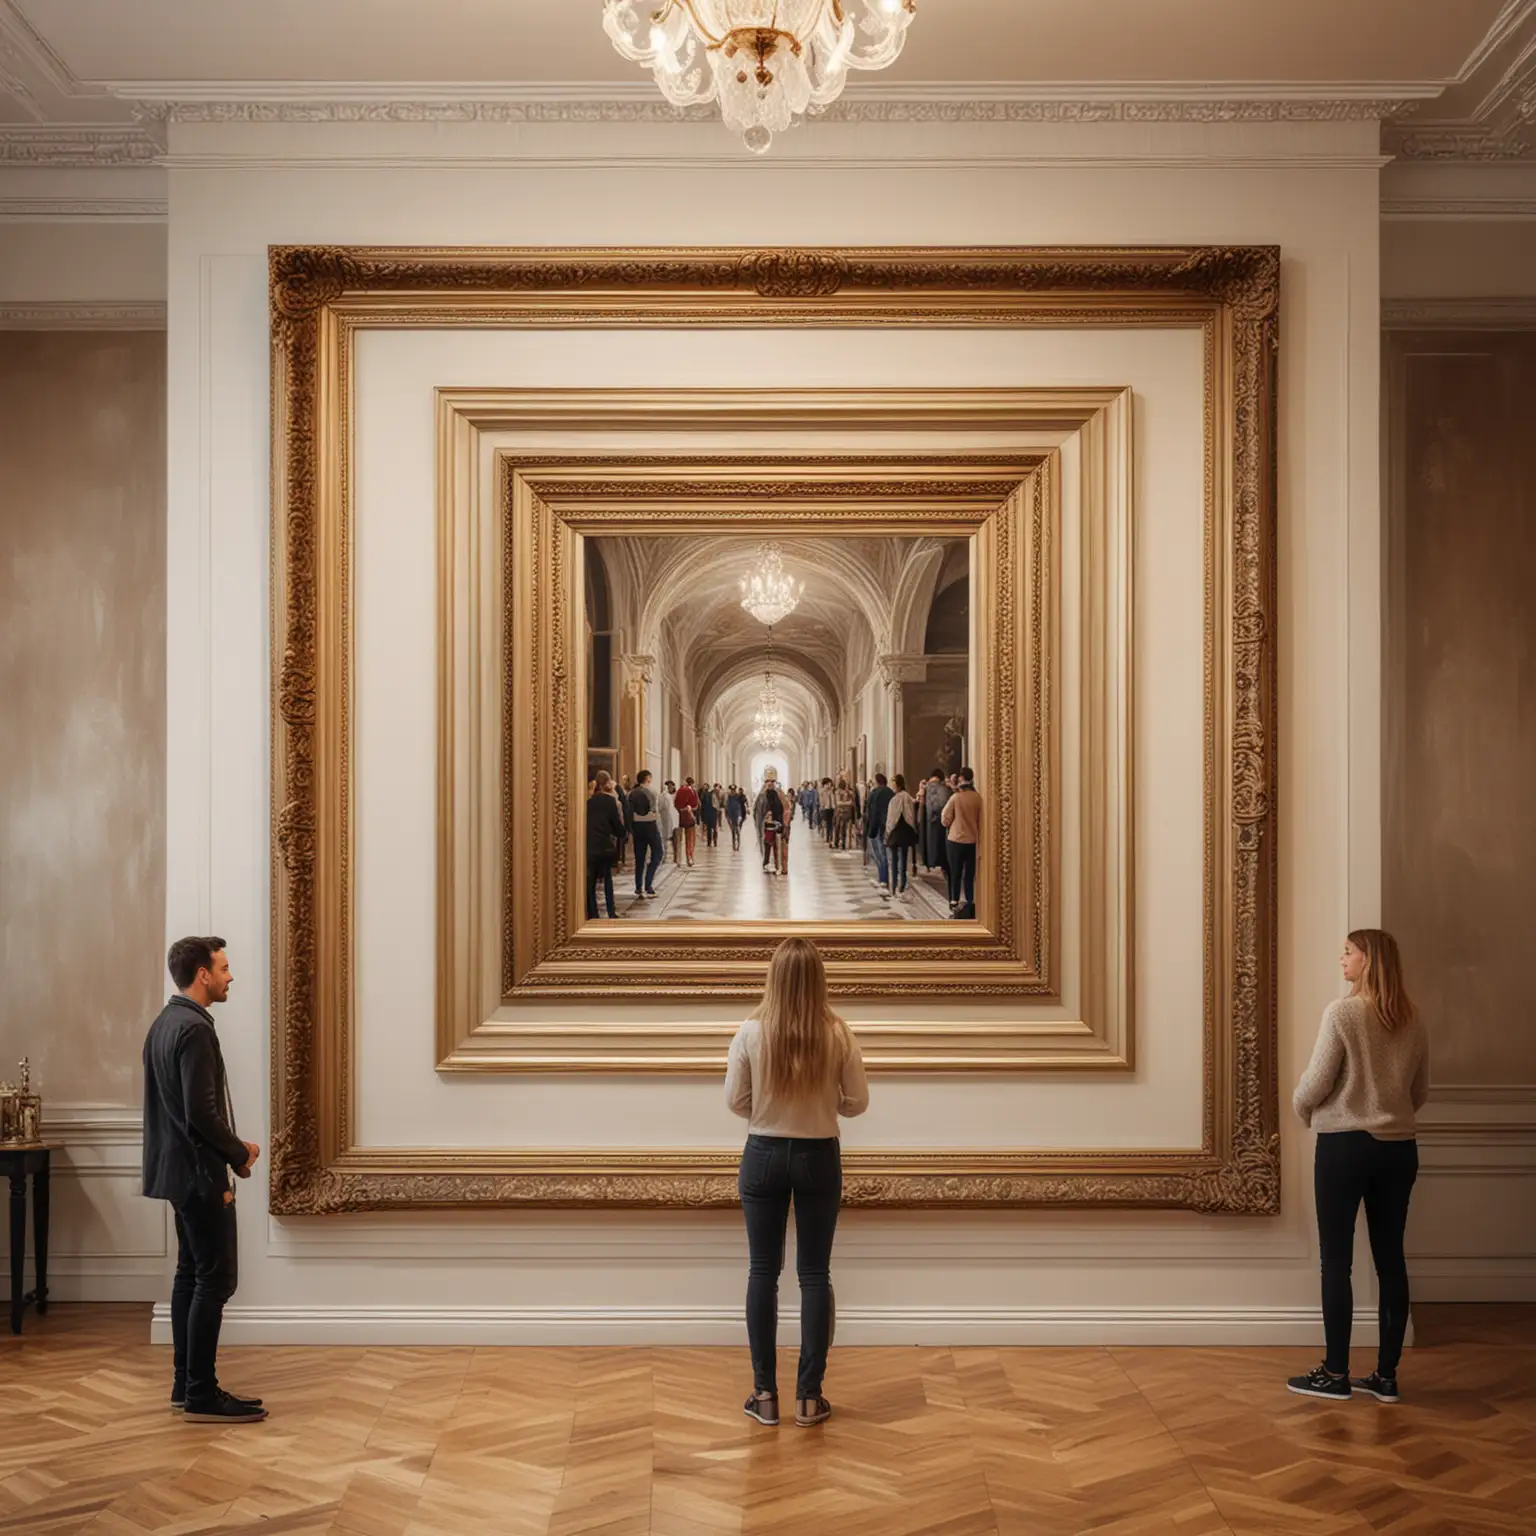 create me a photo of a gallery with people, where the central motif is a square painting in a luxurious frame